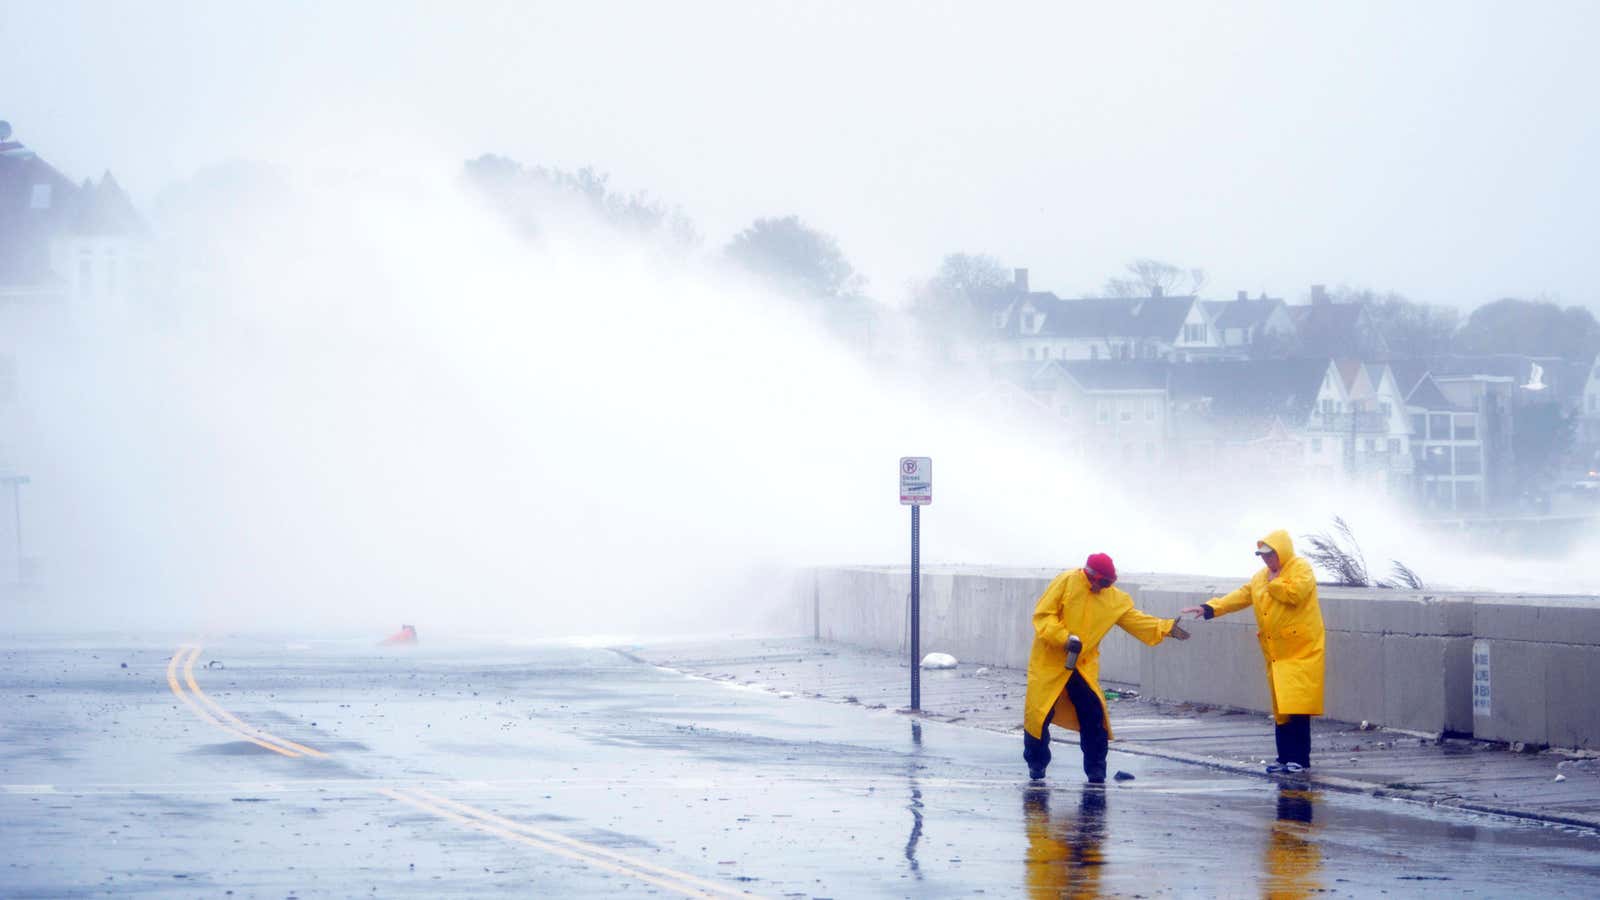 Waves crash over Winthrop Shore Drive in Winthrop, Mass., as Hurricane Sandy comes up the coast of the US